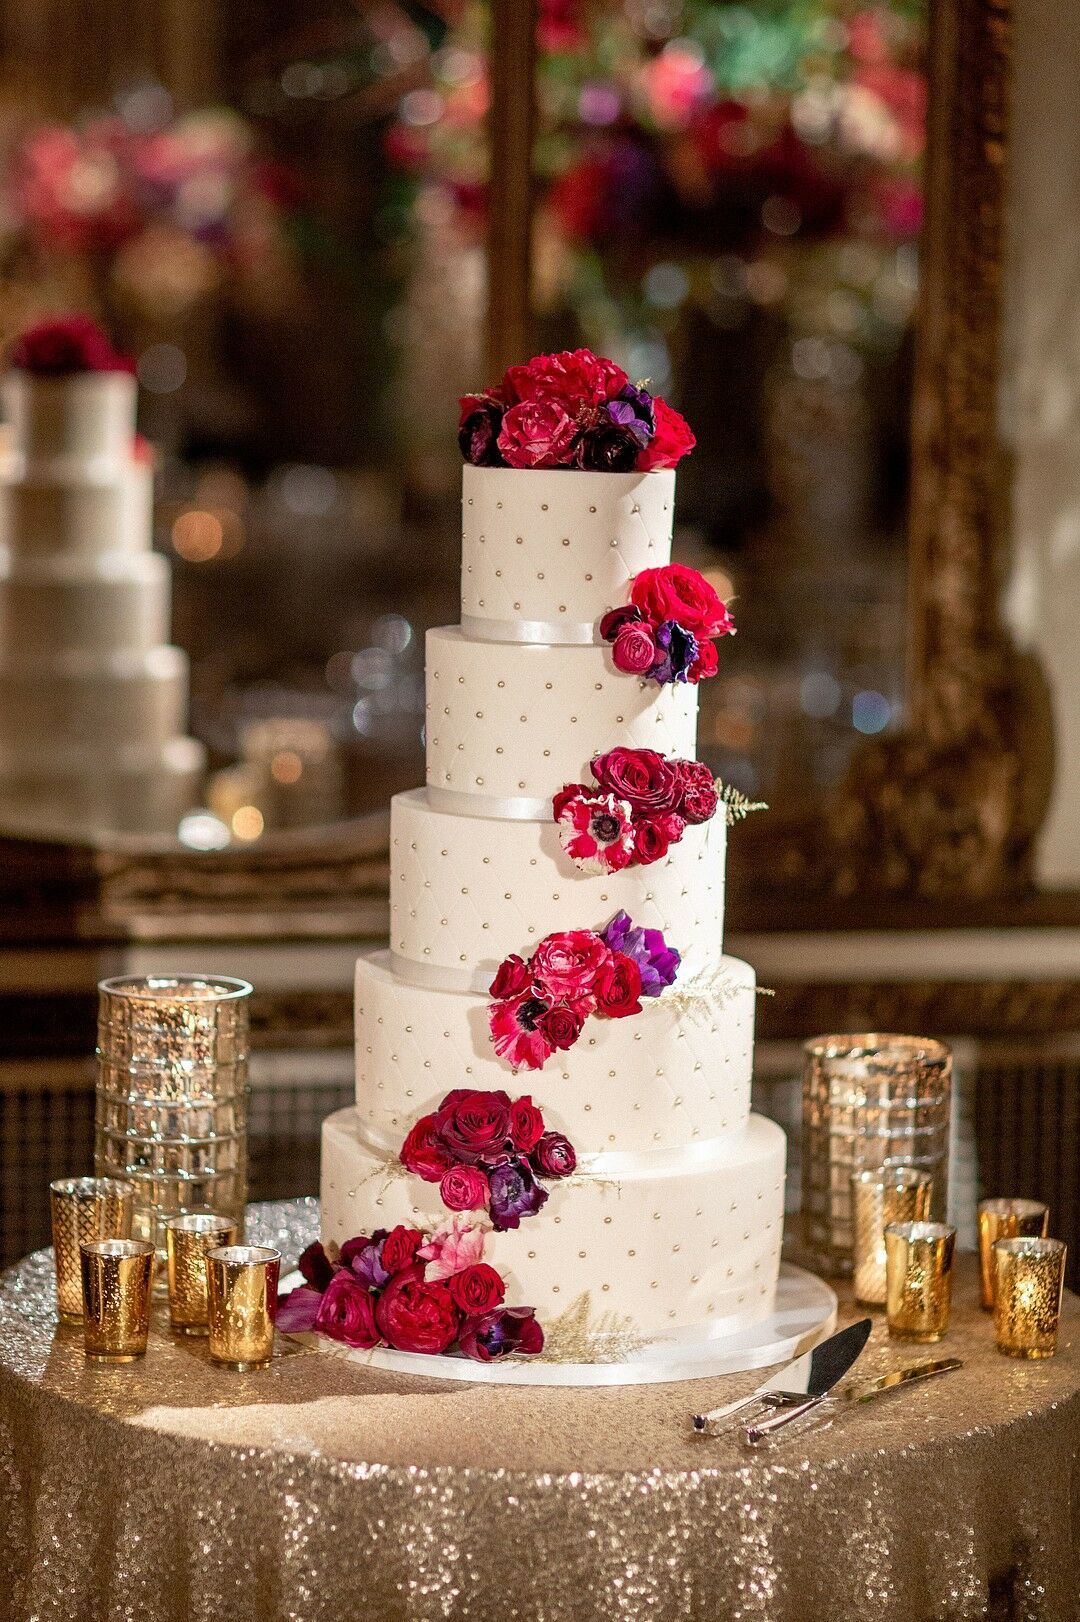 Glamorous Tiered Cake with Dotted Fondant and Red and Purple Flowers